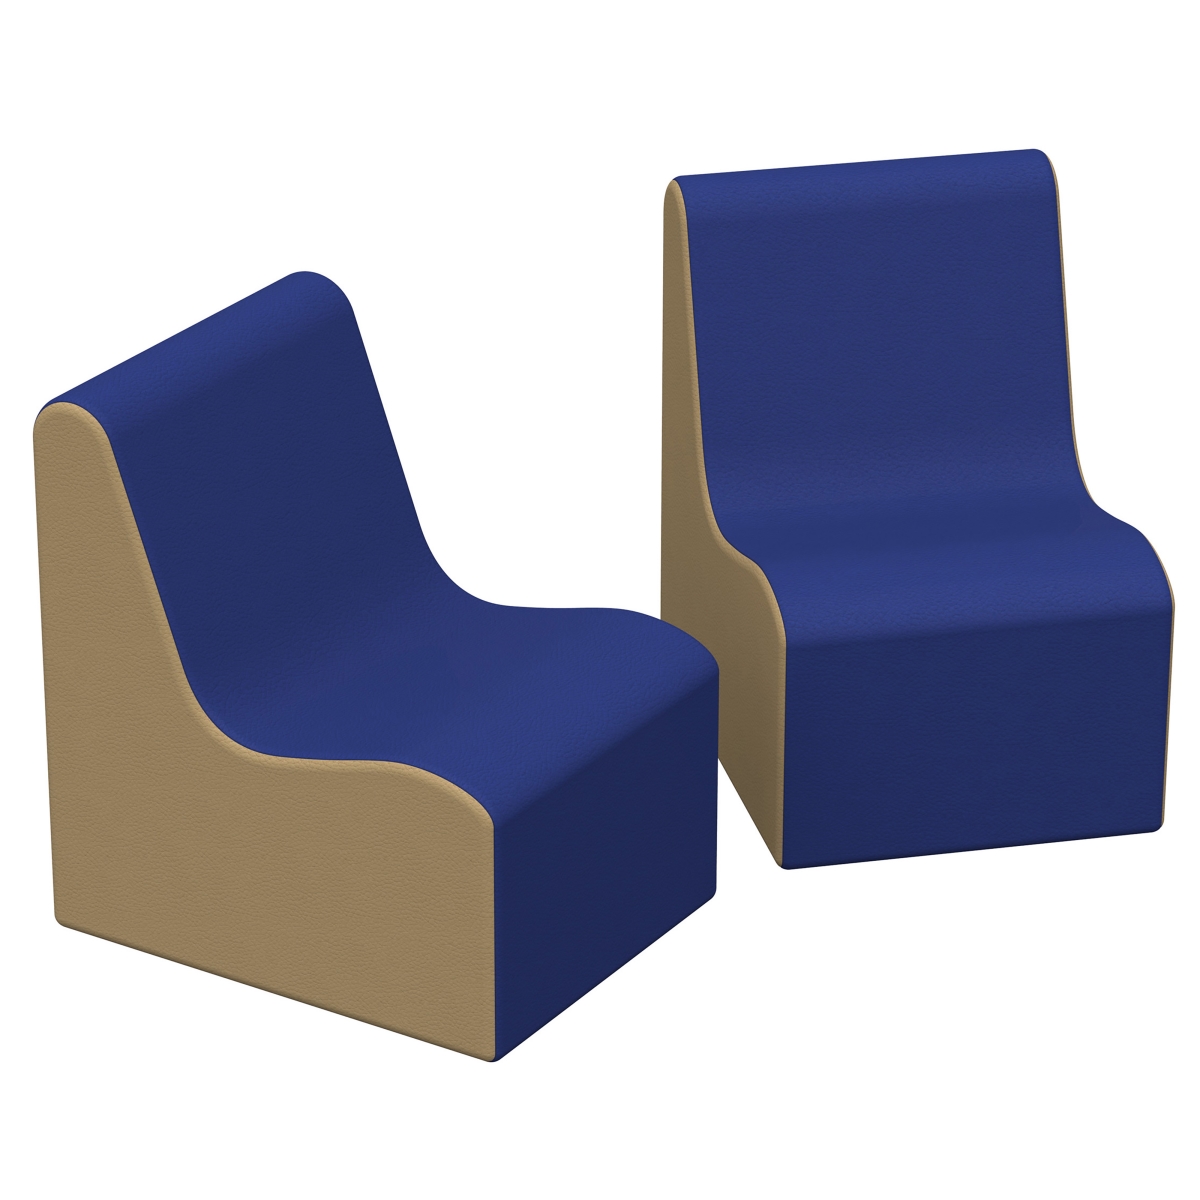 10465-blsd Wave Toddler Chair - Blue & Sand - Pack Of 2